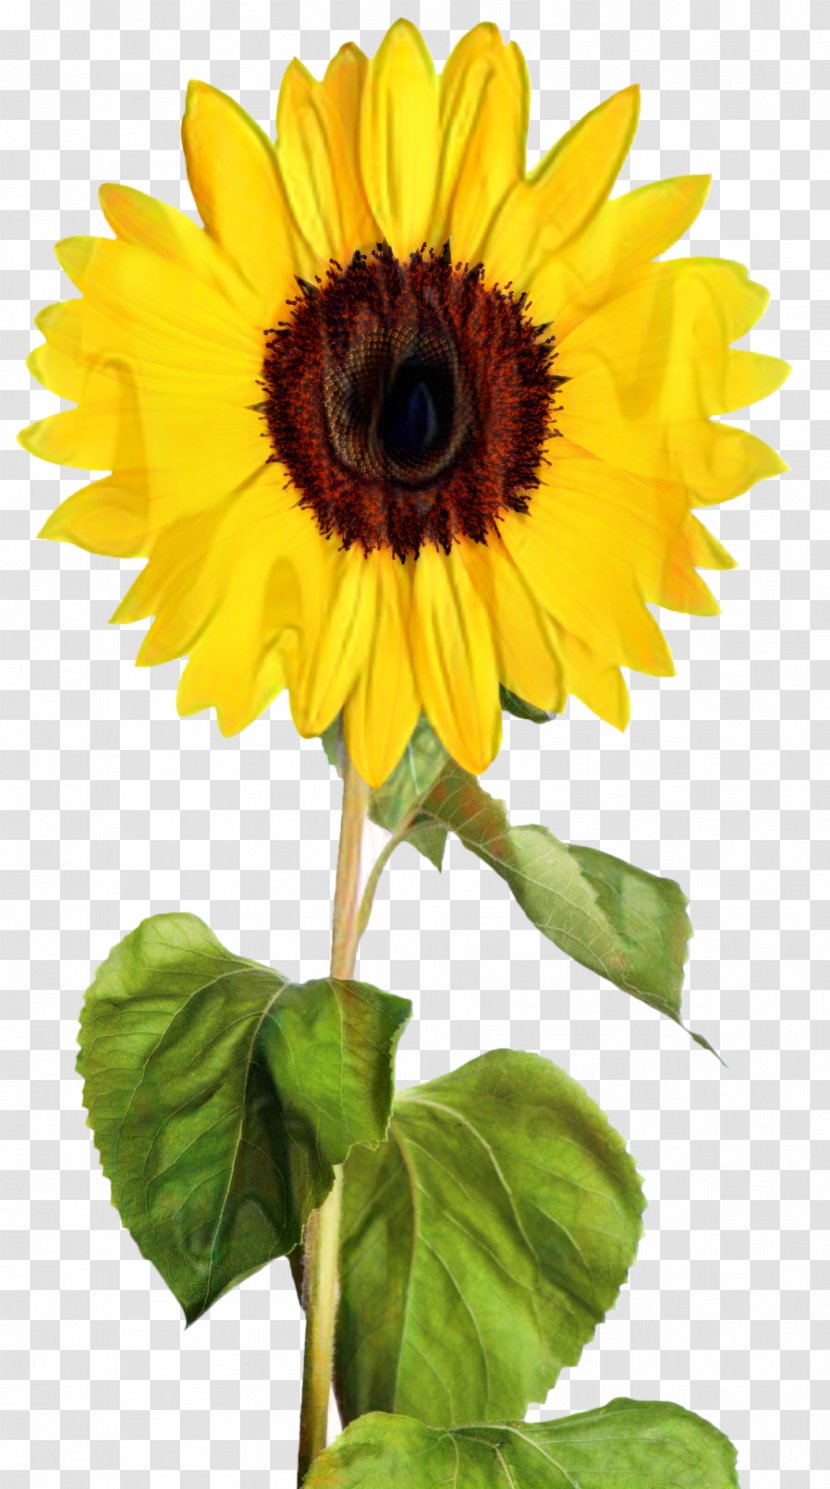 Clip Art Transparency Image Vector Graphics - Flower - Transparent Sunflower Transparent PNG